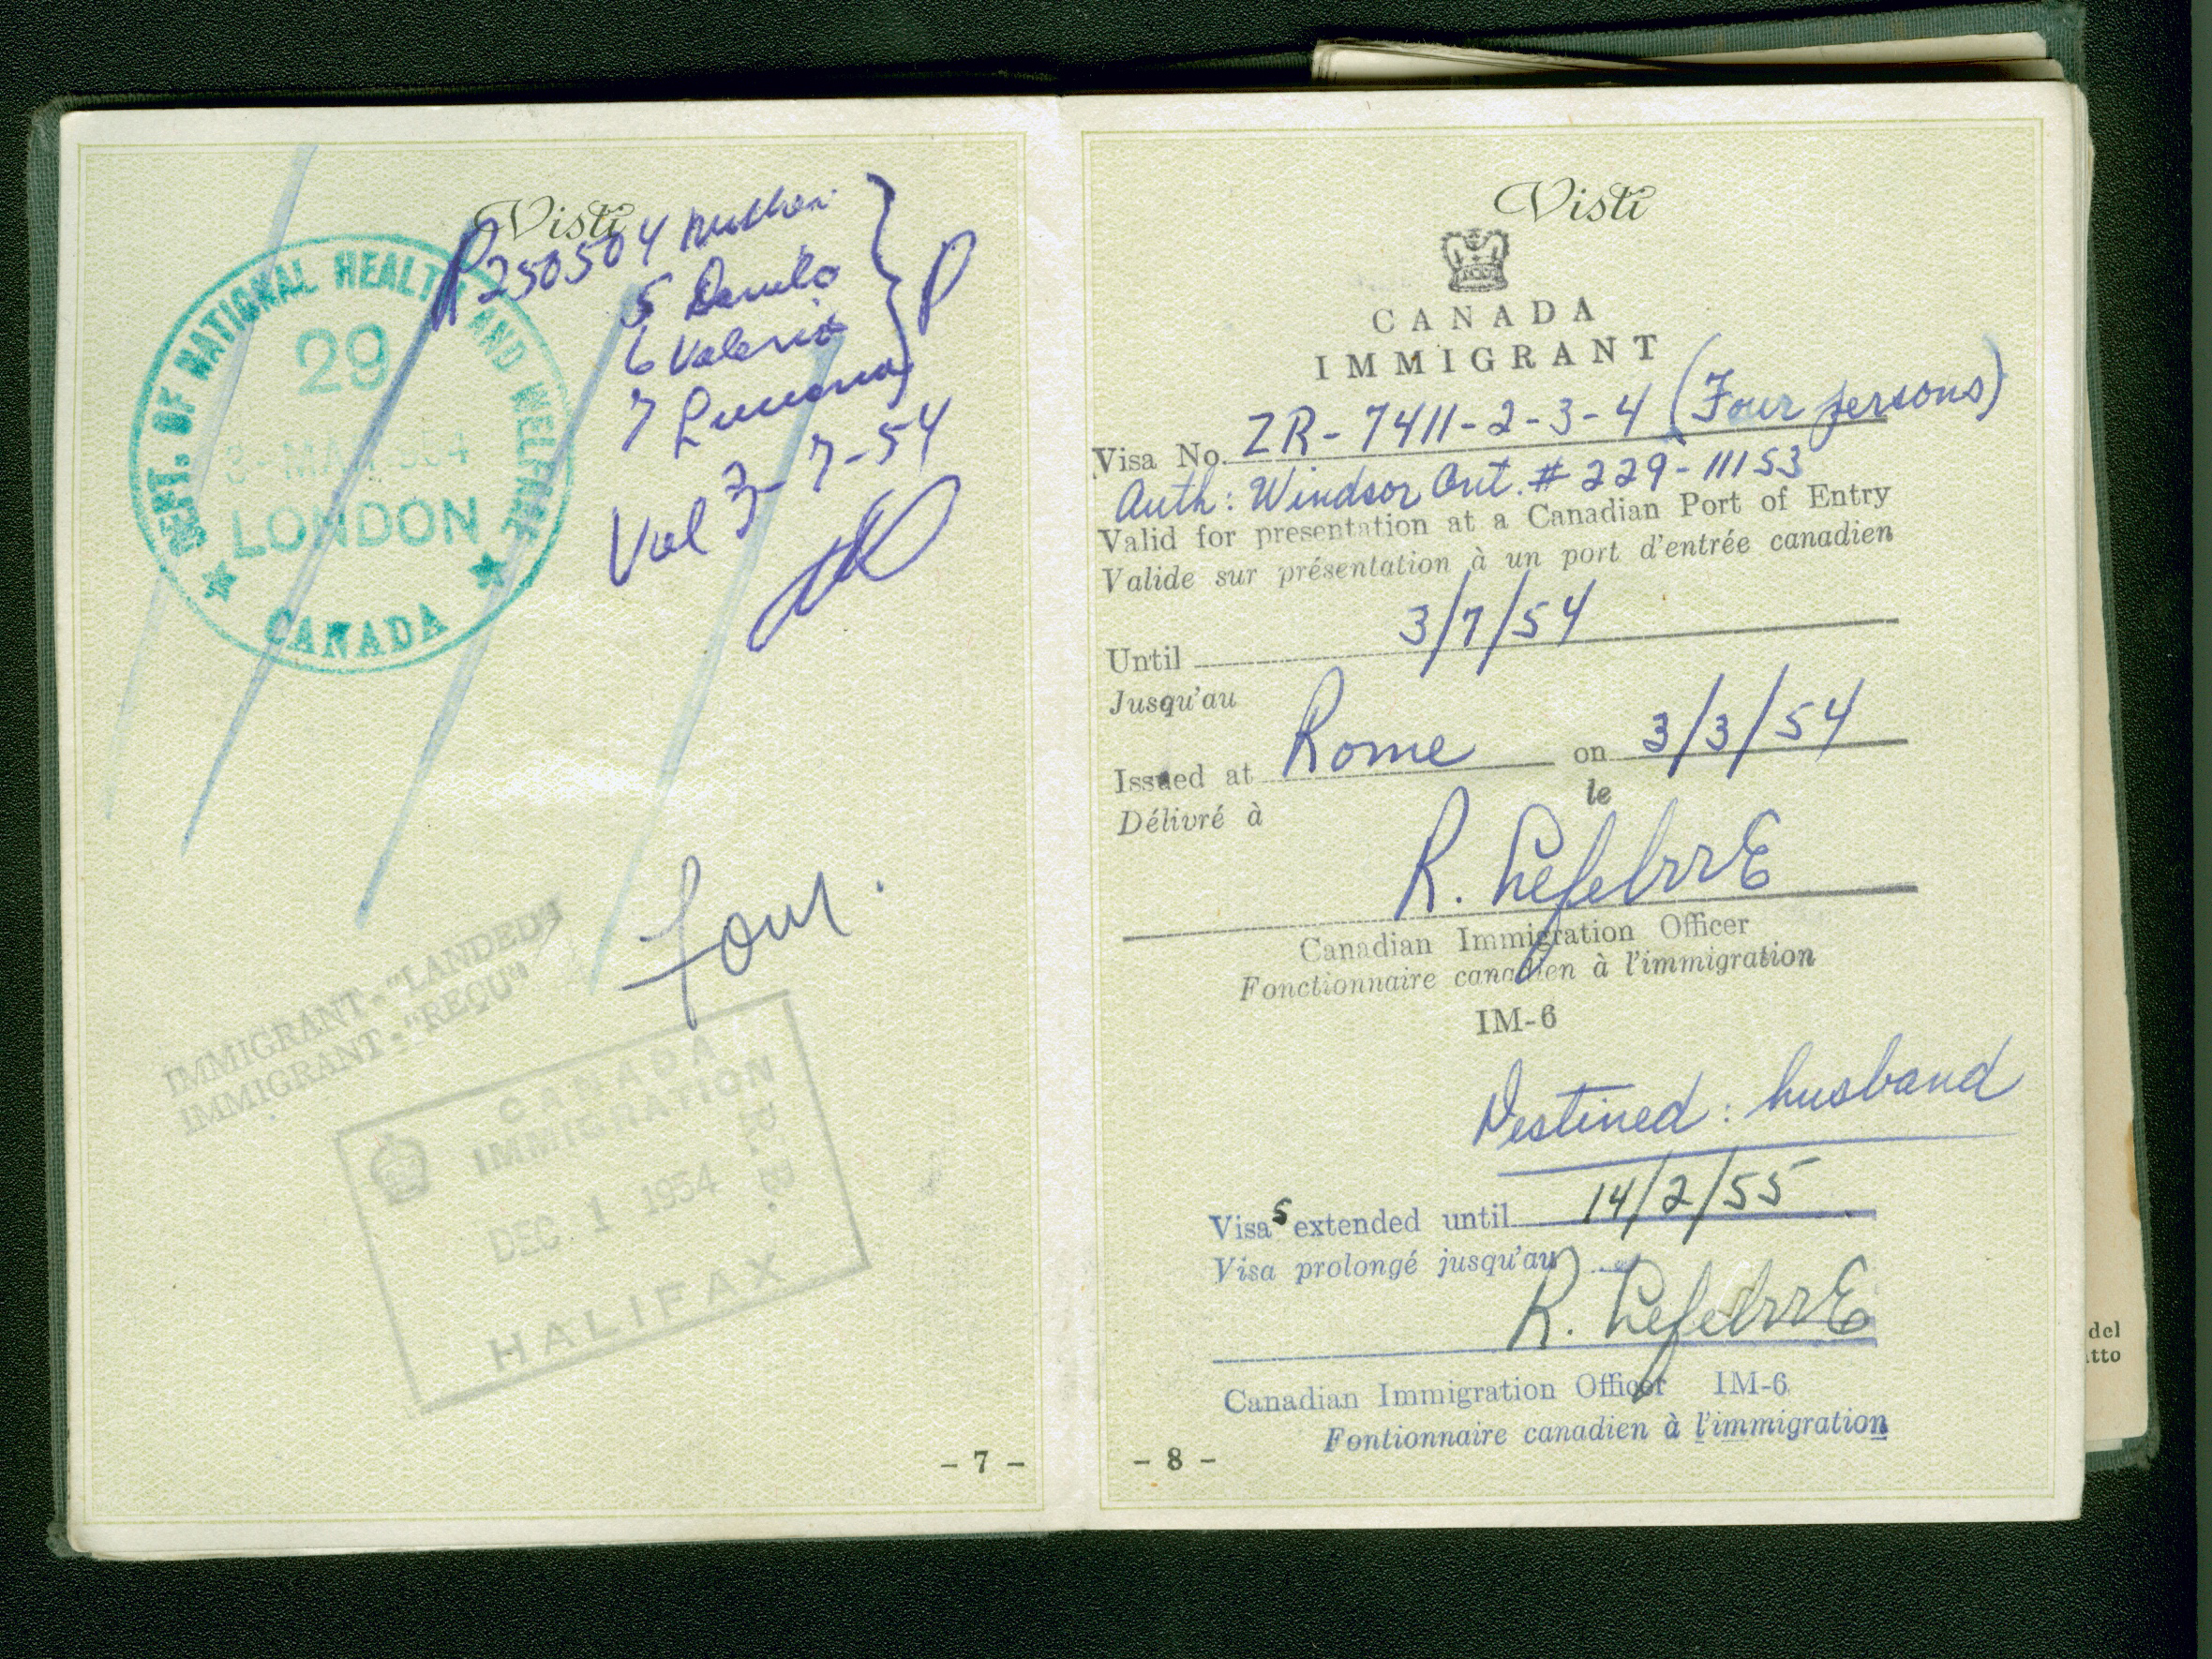 Old Italian passport with stamp of Canada Immigrant.